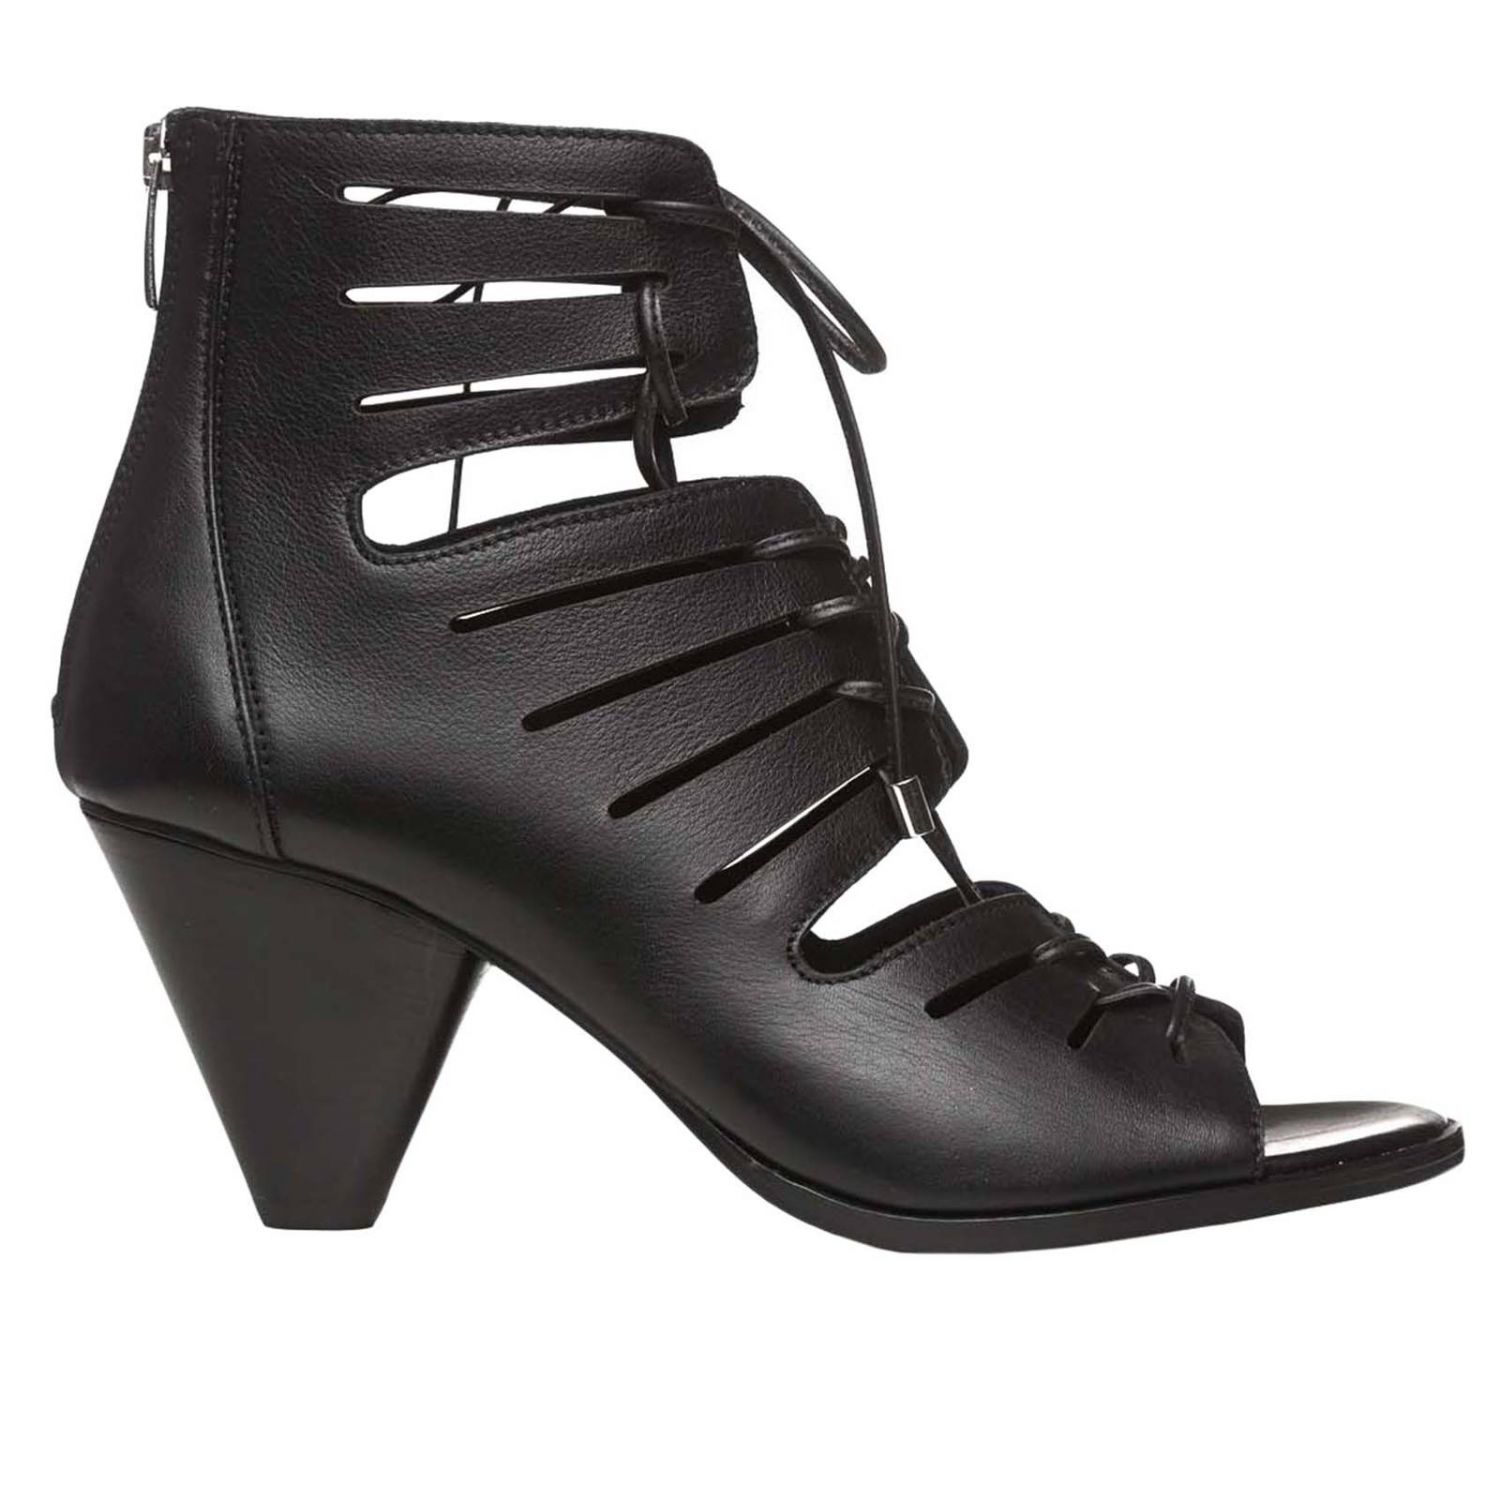 Janet & Janet Outlet: flat booties for woman - Black | Janet & Janet ...